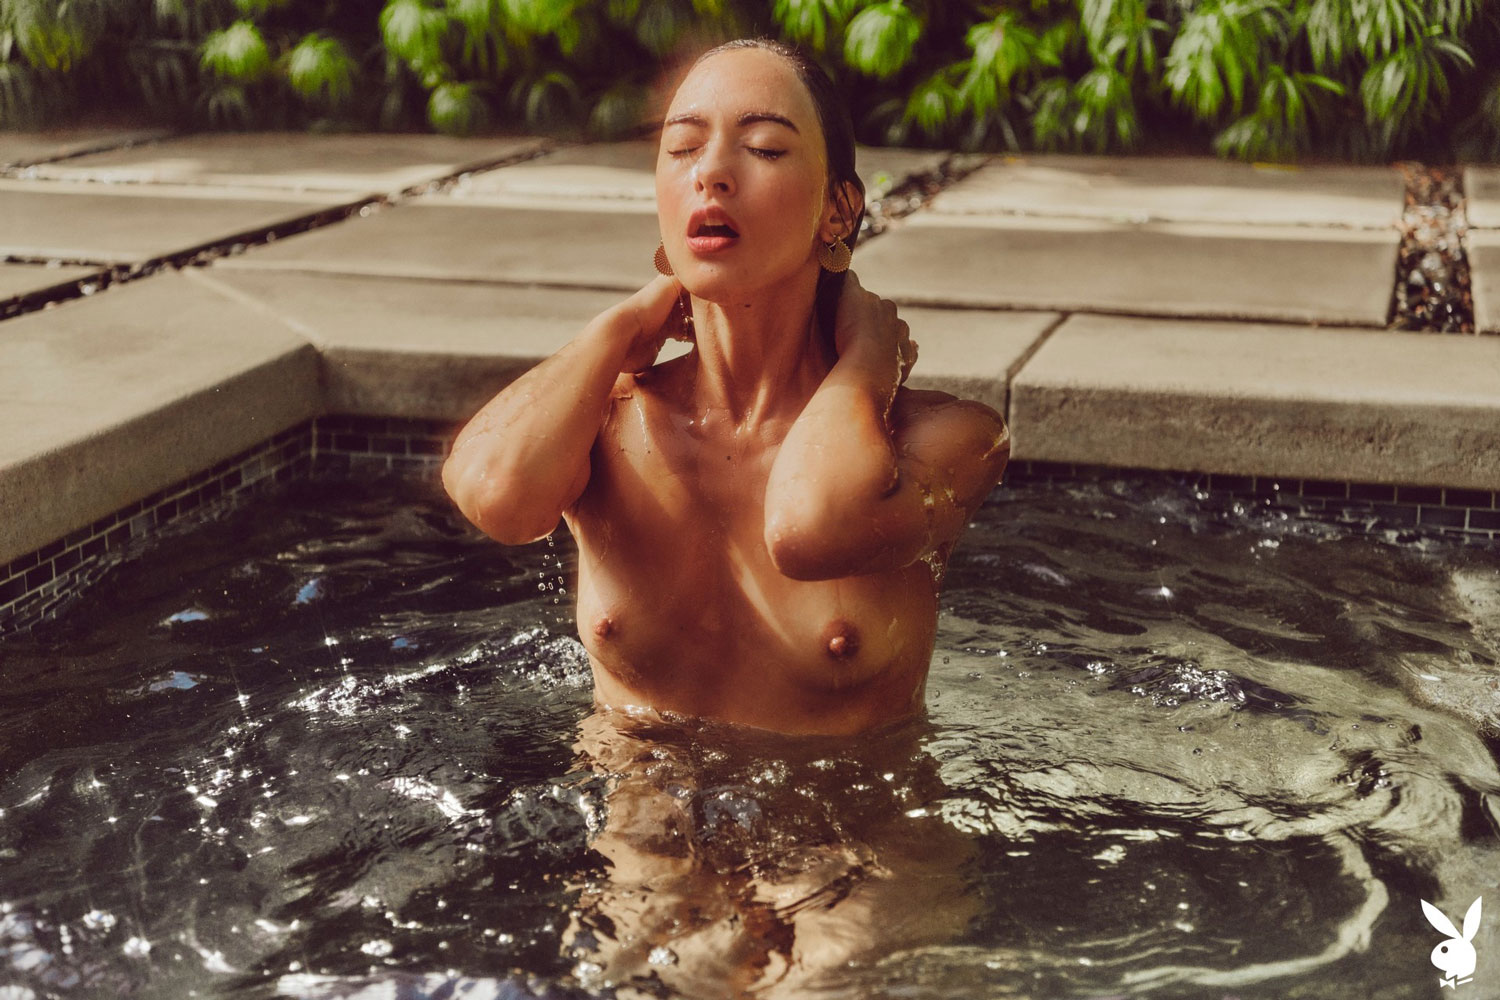 genevieve liberte cools down in the pool 4